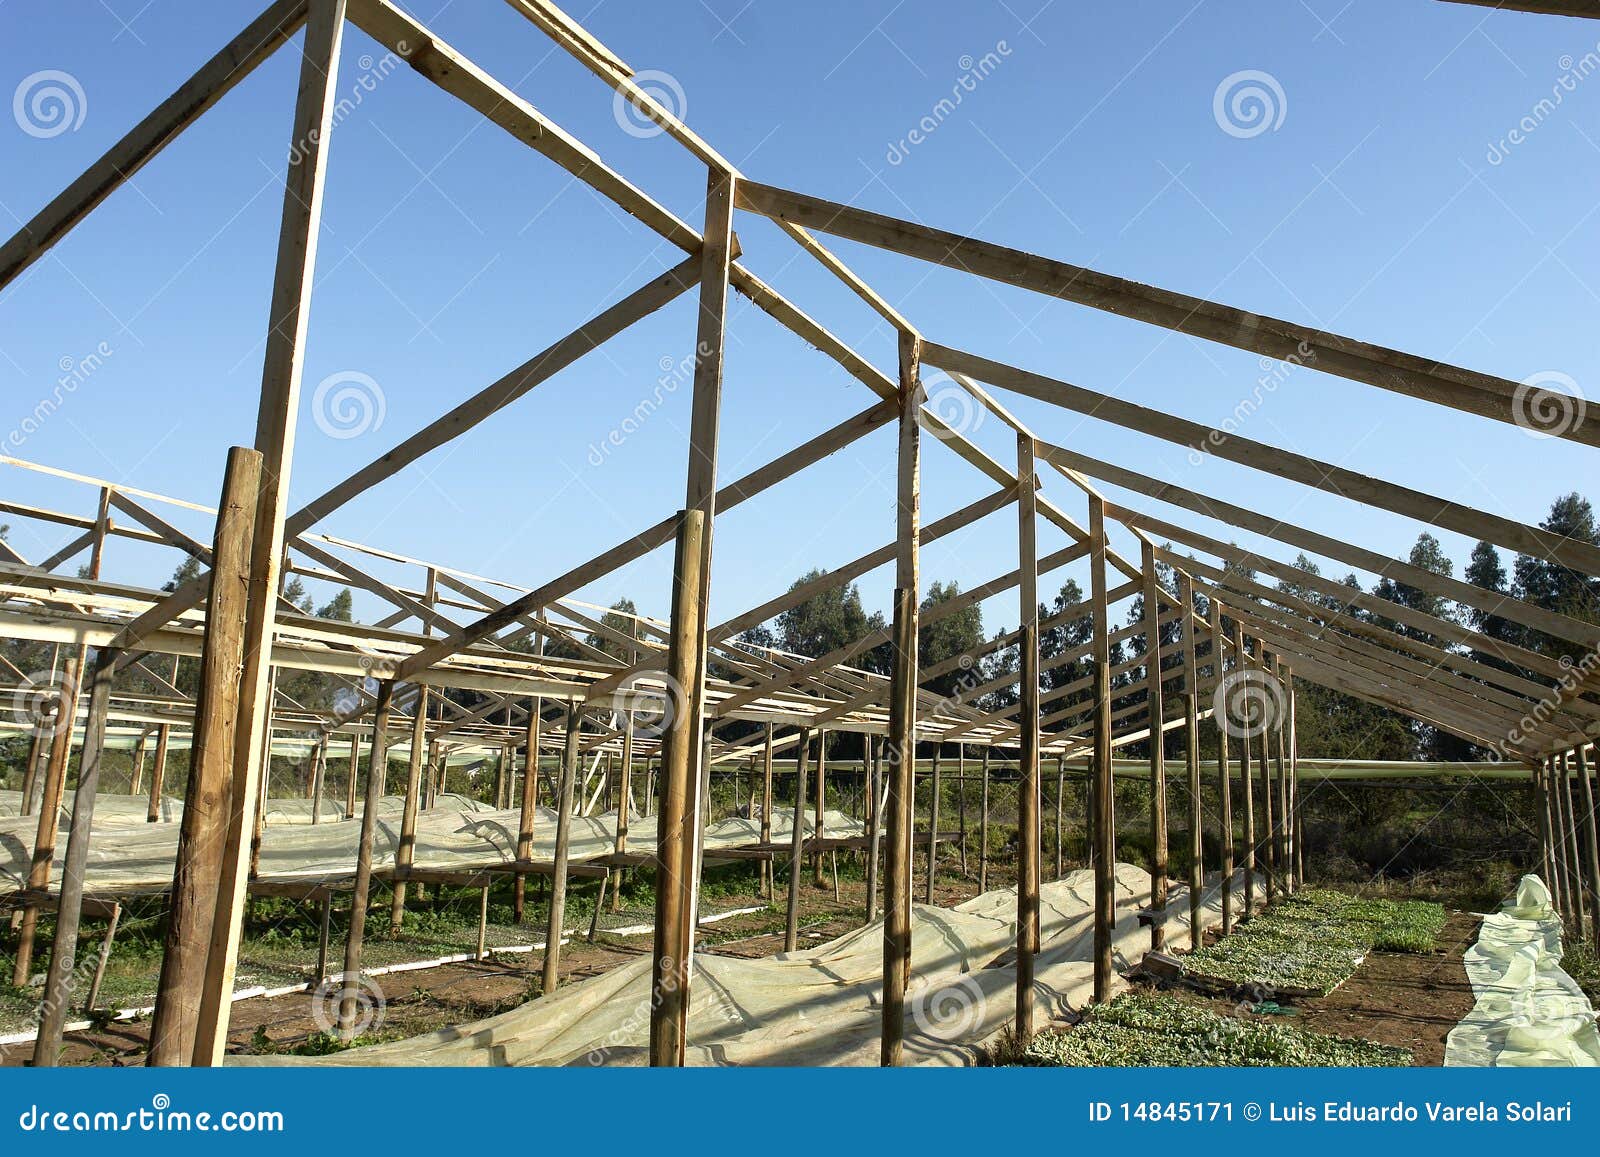 Wooden Greenhouse. Stock Image - Image: 14845171